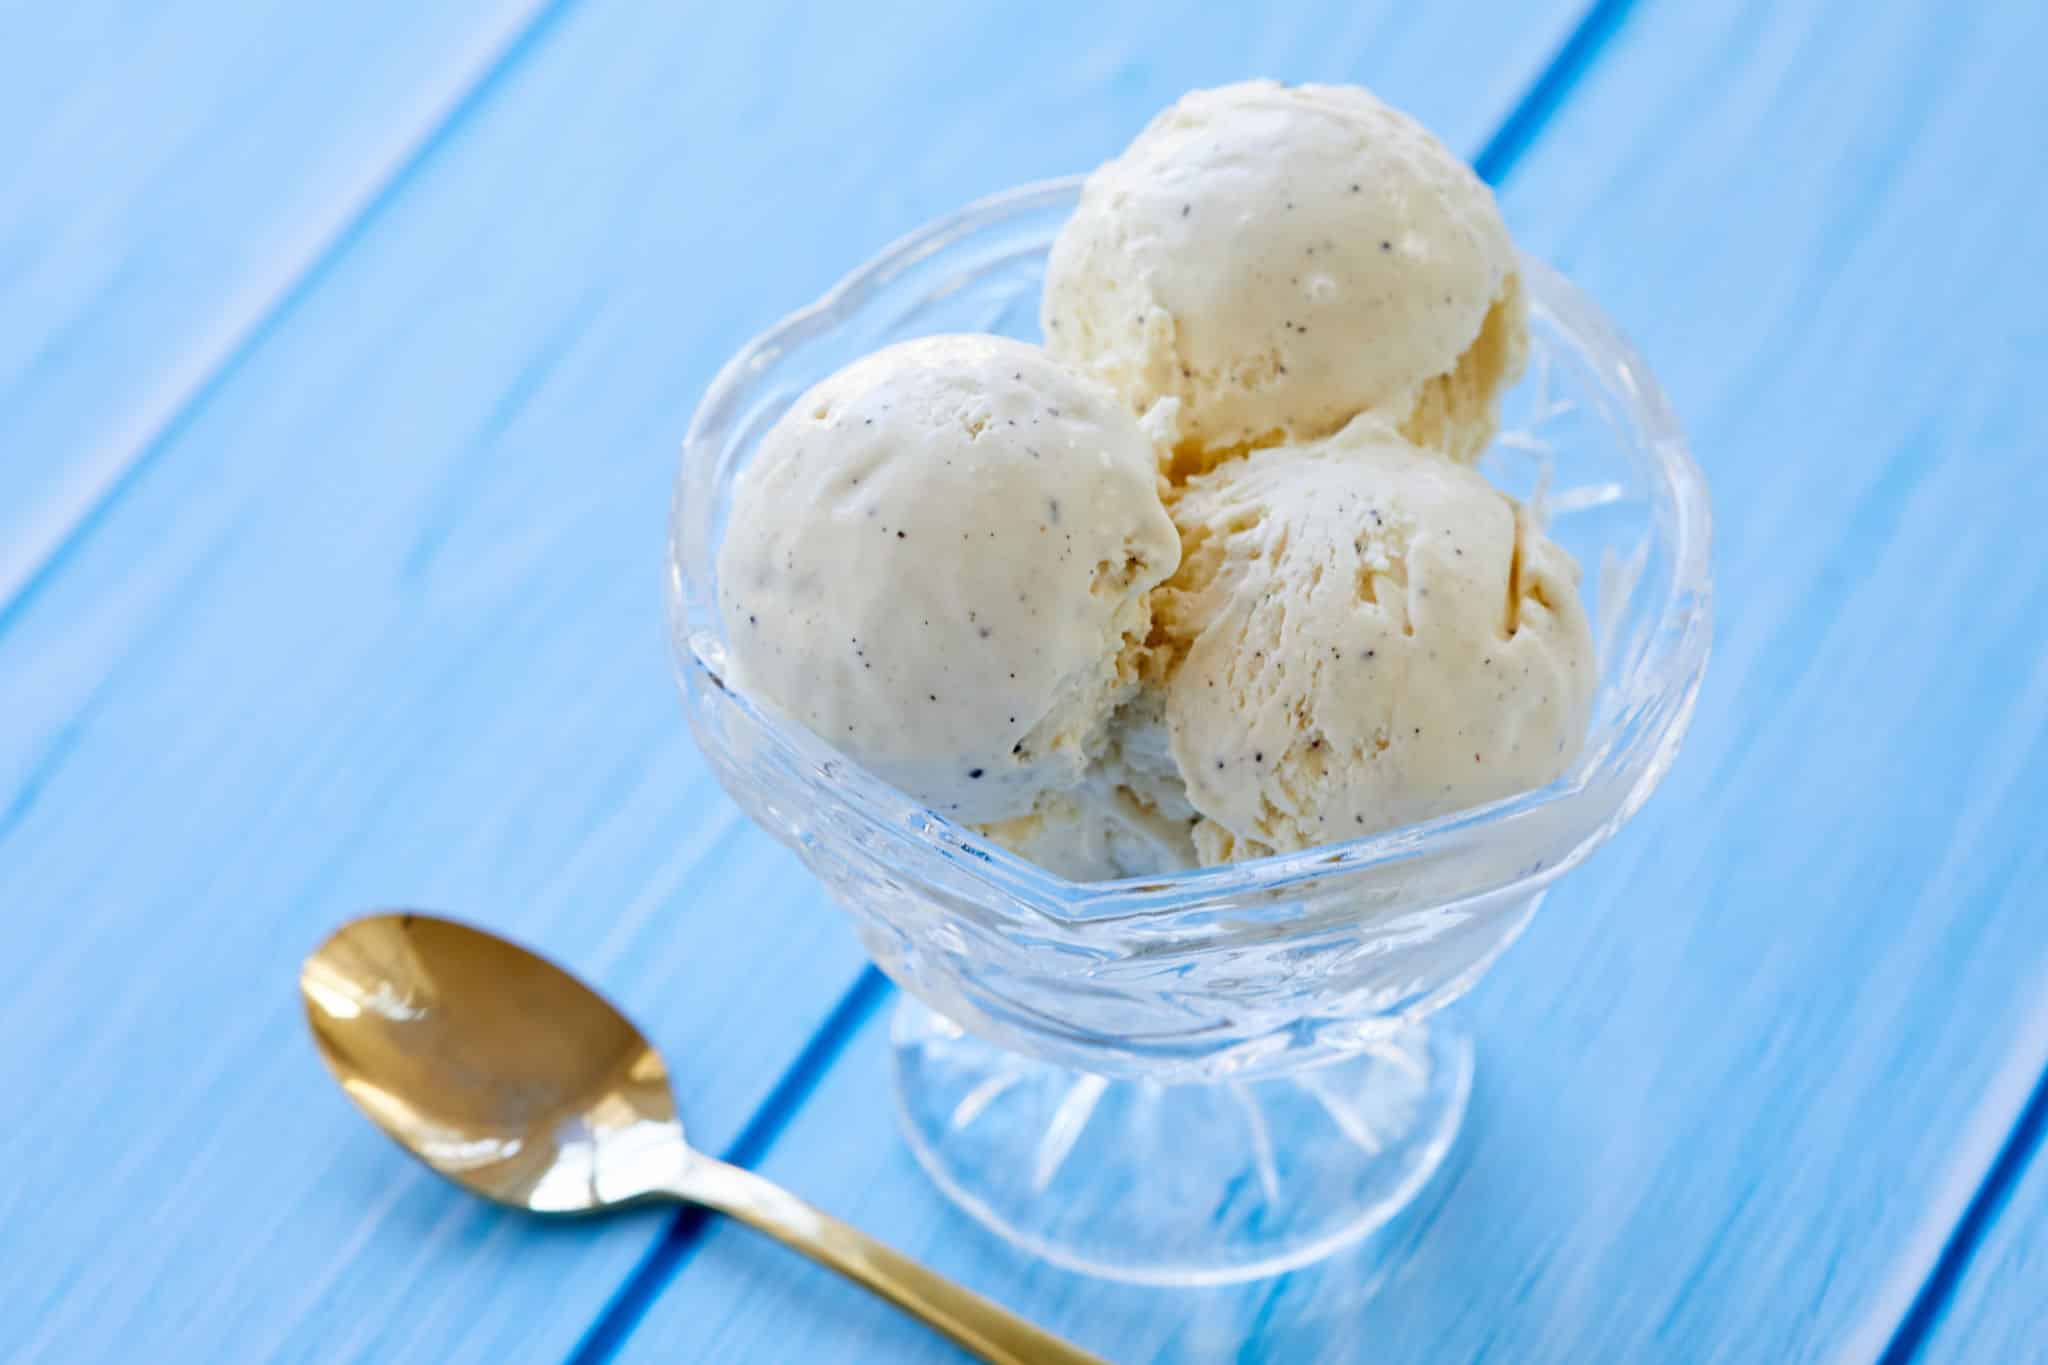 15 Things to Buy if You Really, Really Love Ice Cream